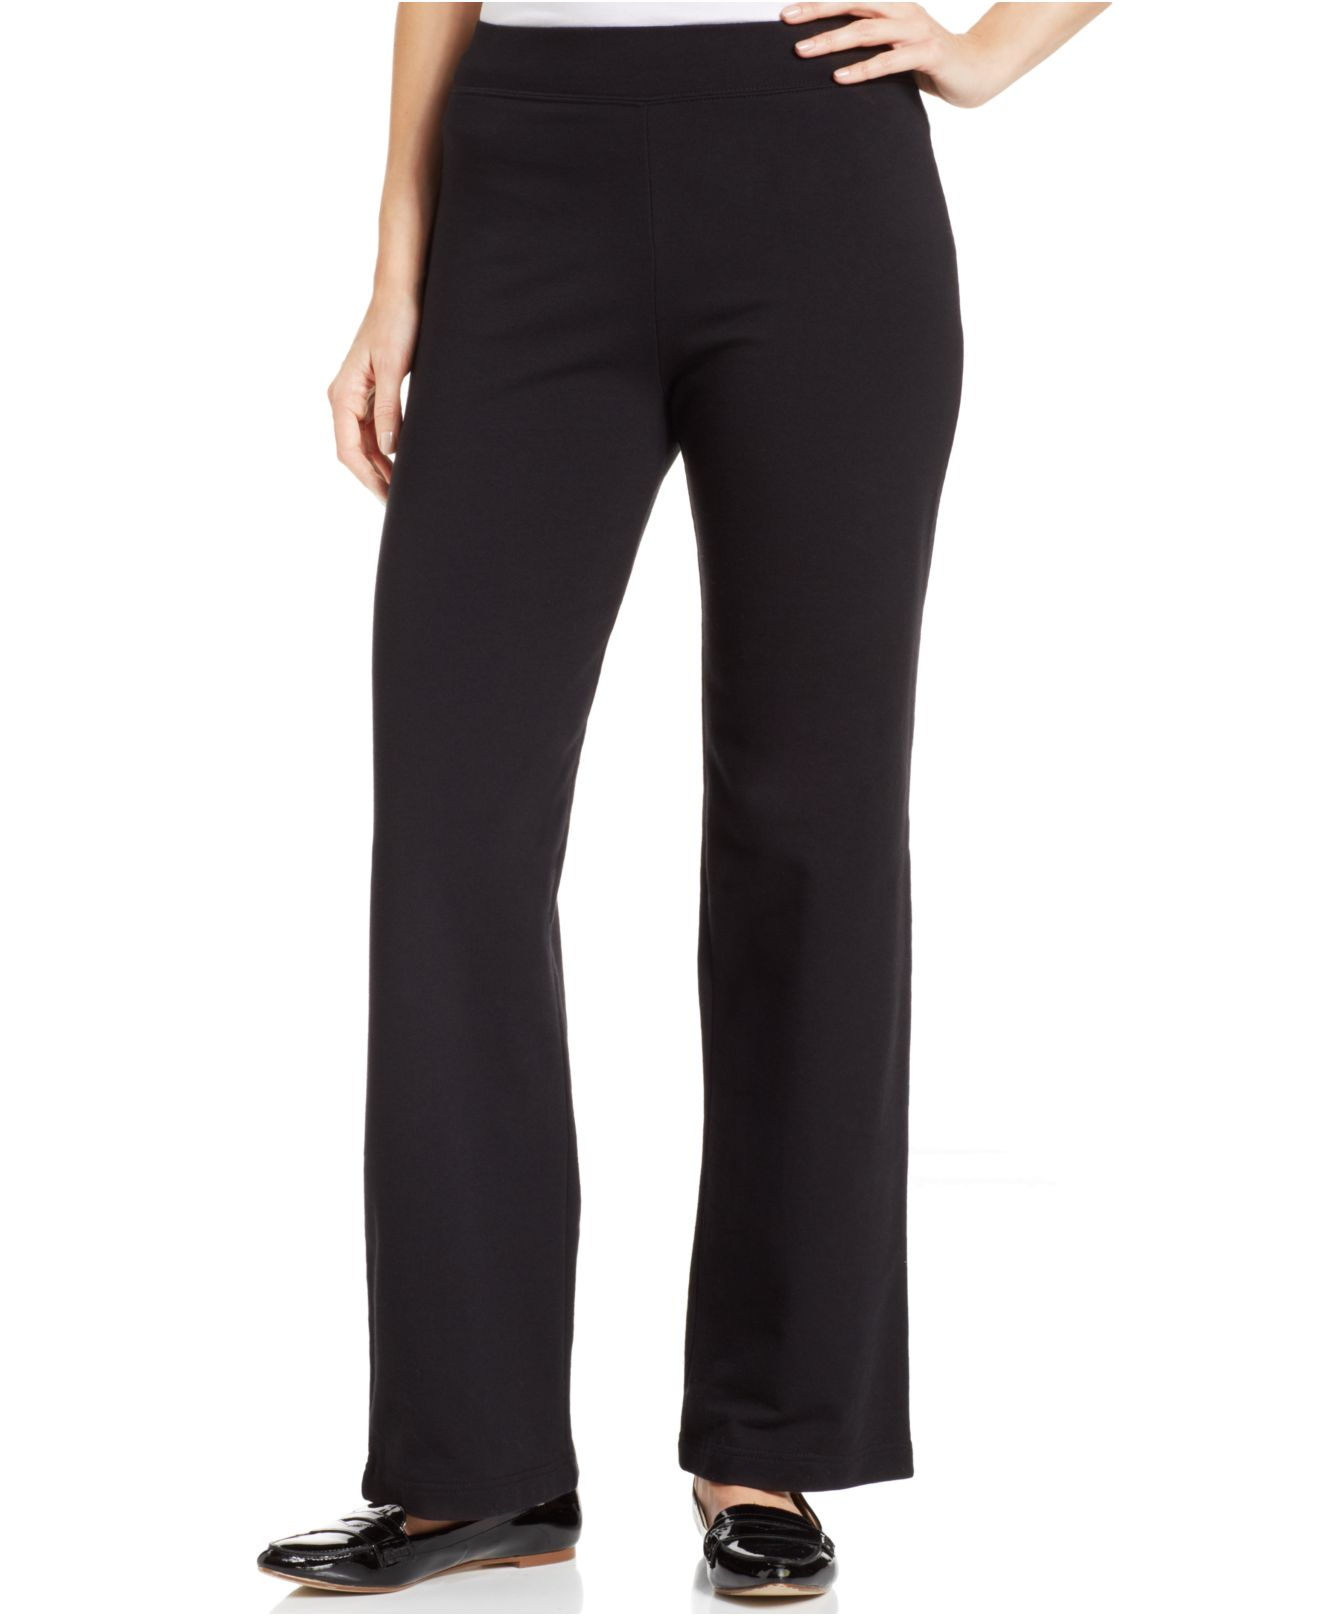 Jones New York Signature Petite French Terry Lounge Pants in Black - Lyst